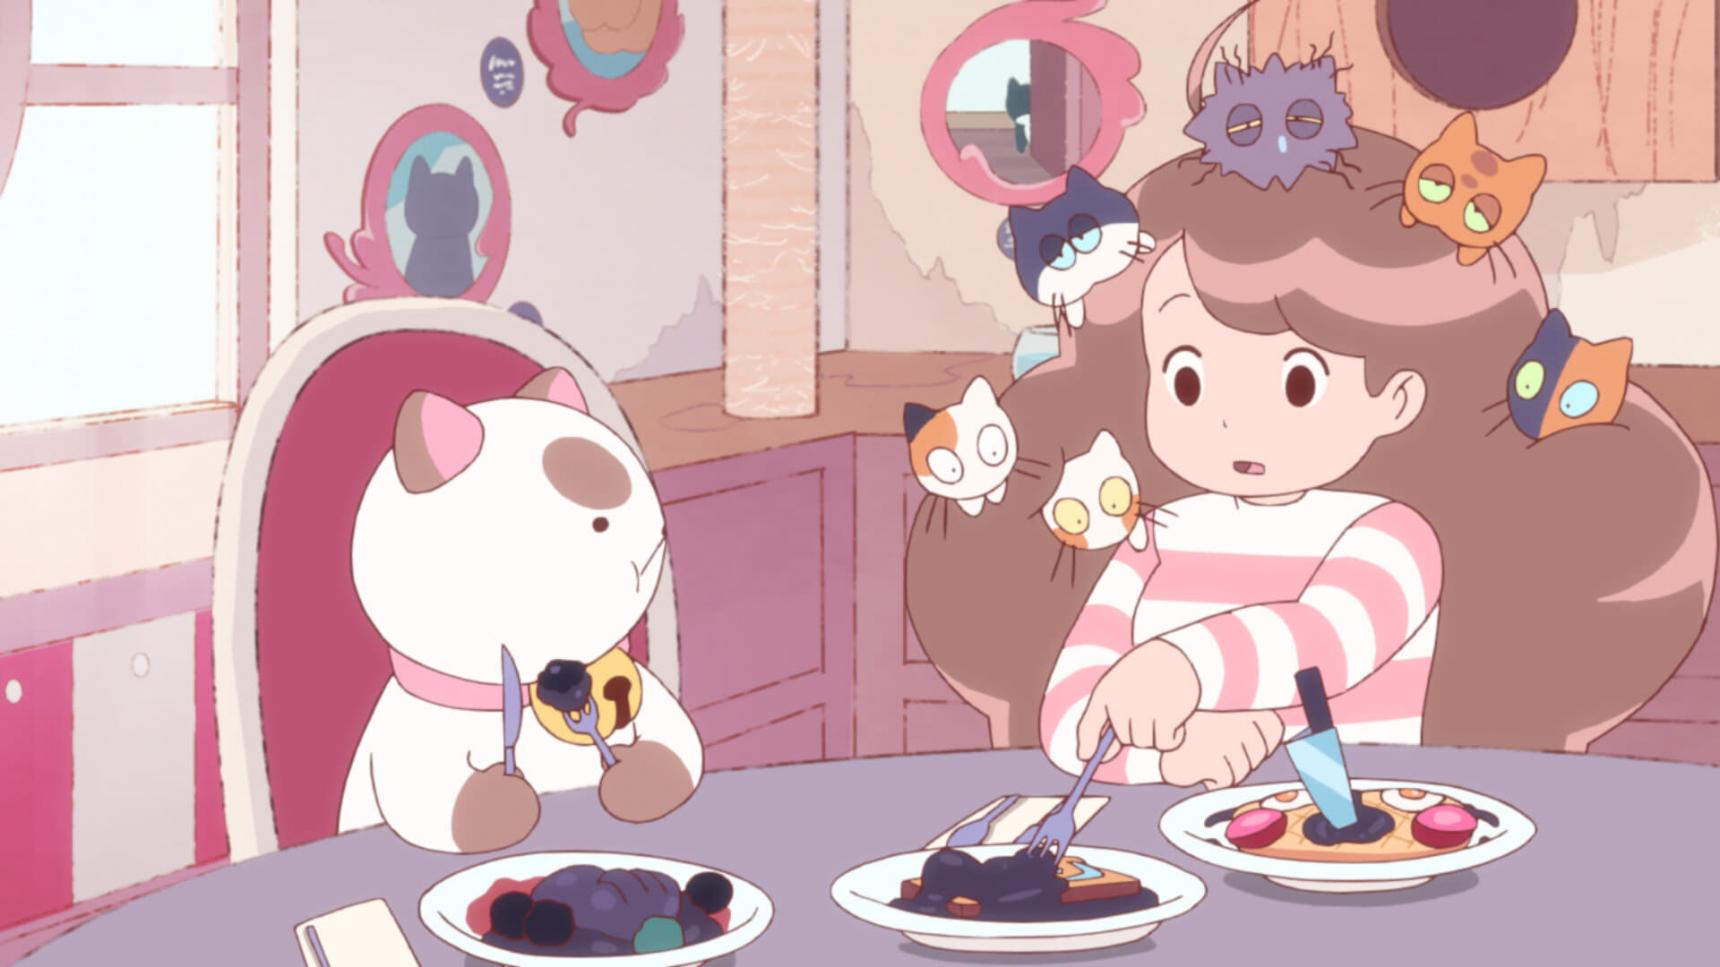 Poster del episodio 4 de Bee and PuppyCat: Lazy in Space online